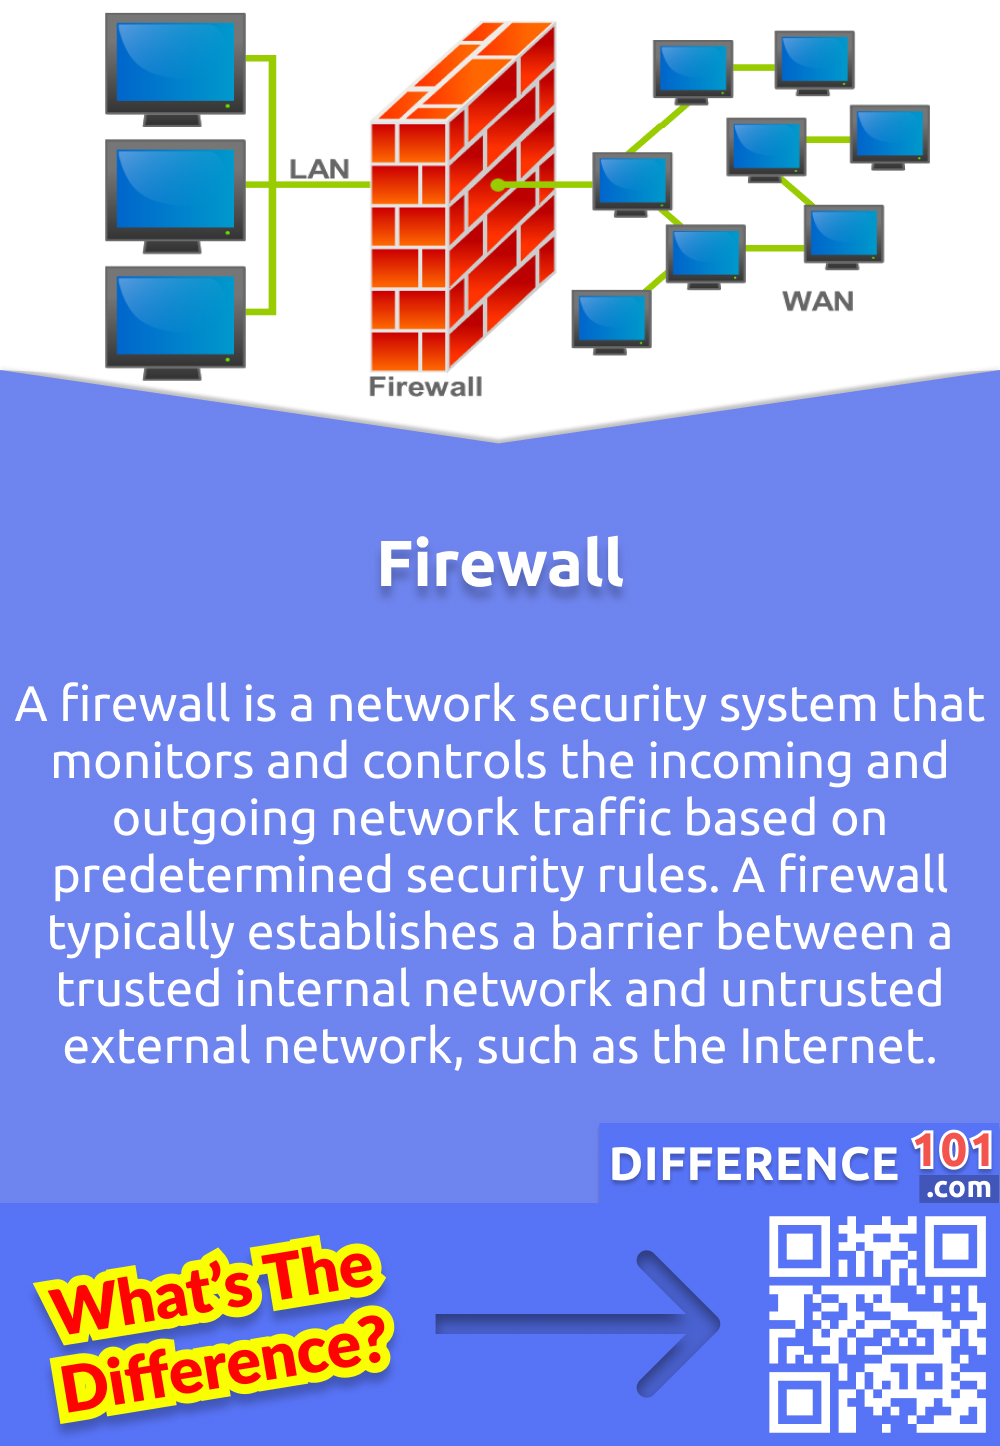 What Is Firewall? A firewall is a network security system that monitors and controls the incoming and outgoing network traffic based on predetermined security rules. A firewall typically establishes a barrier between a trusted internal network and untrusted external network, such as the Internet.n